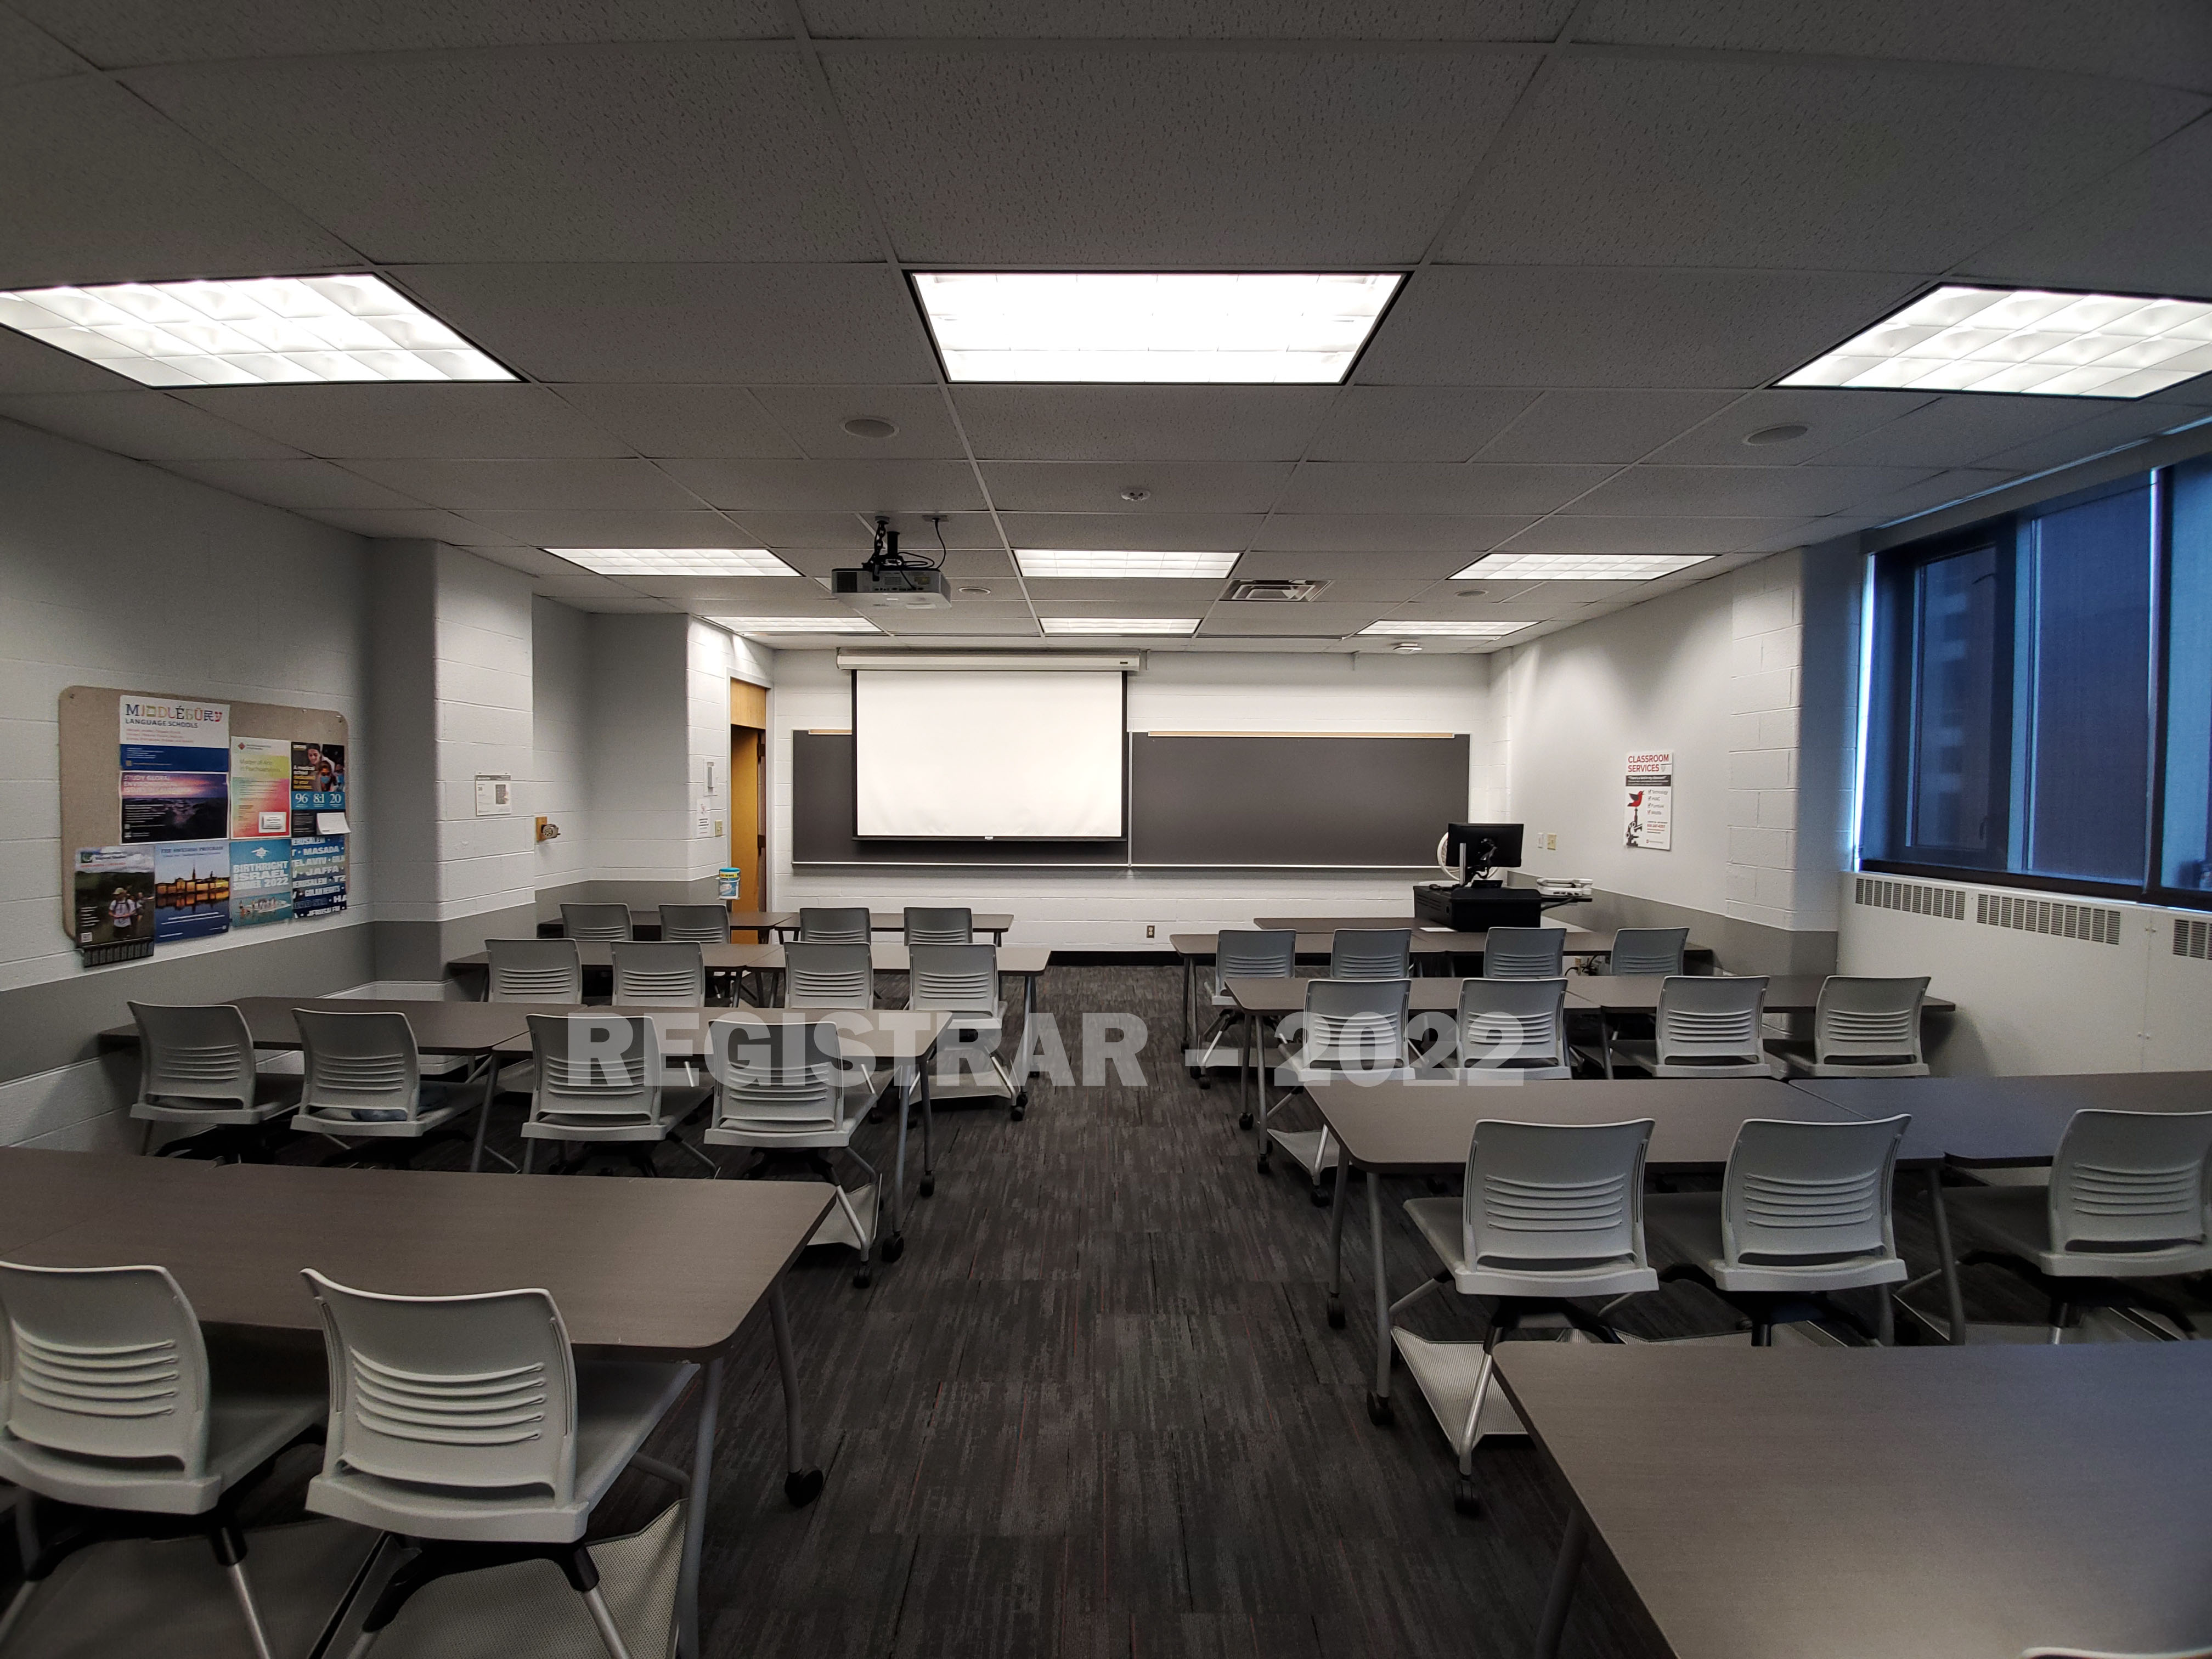 Bolz Hall room 314 ultra wide angle view from the back of the room with projector screen down